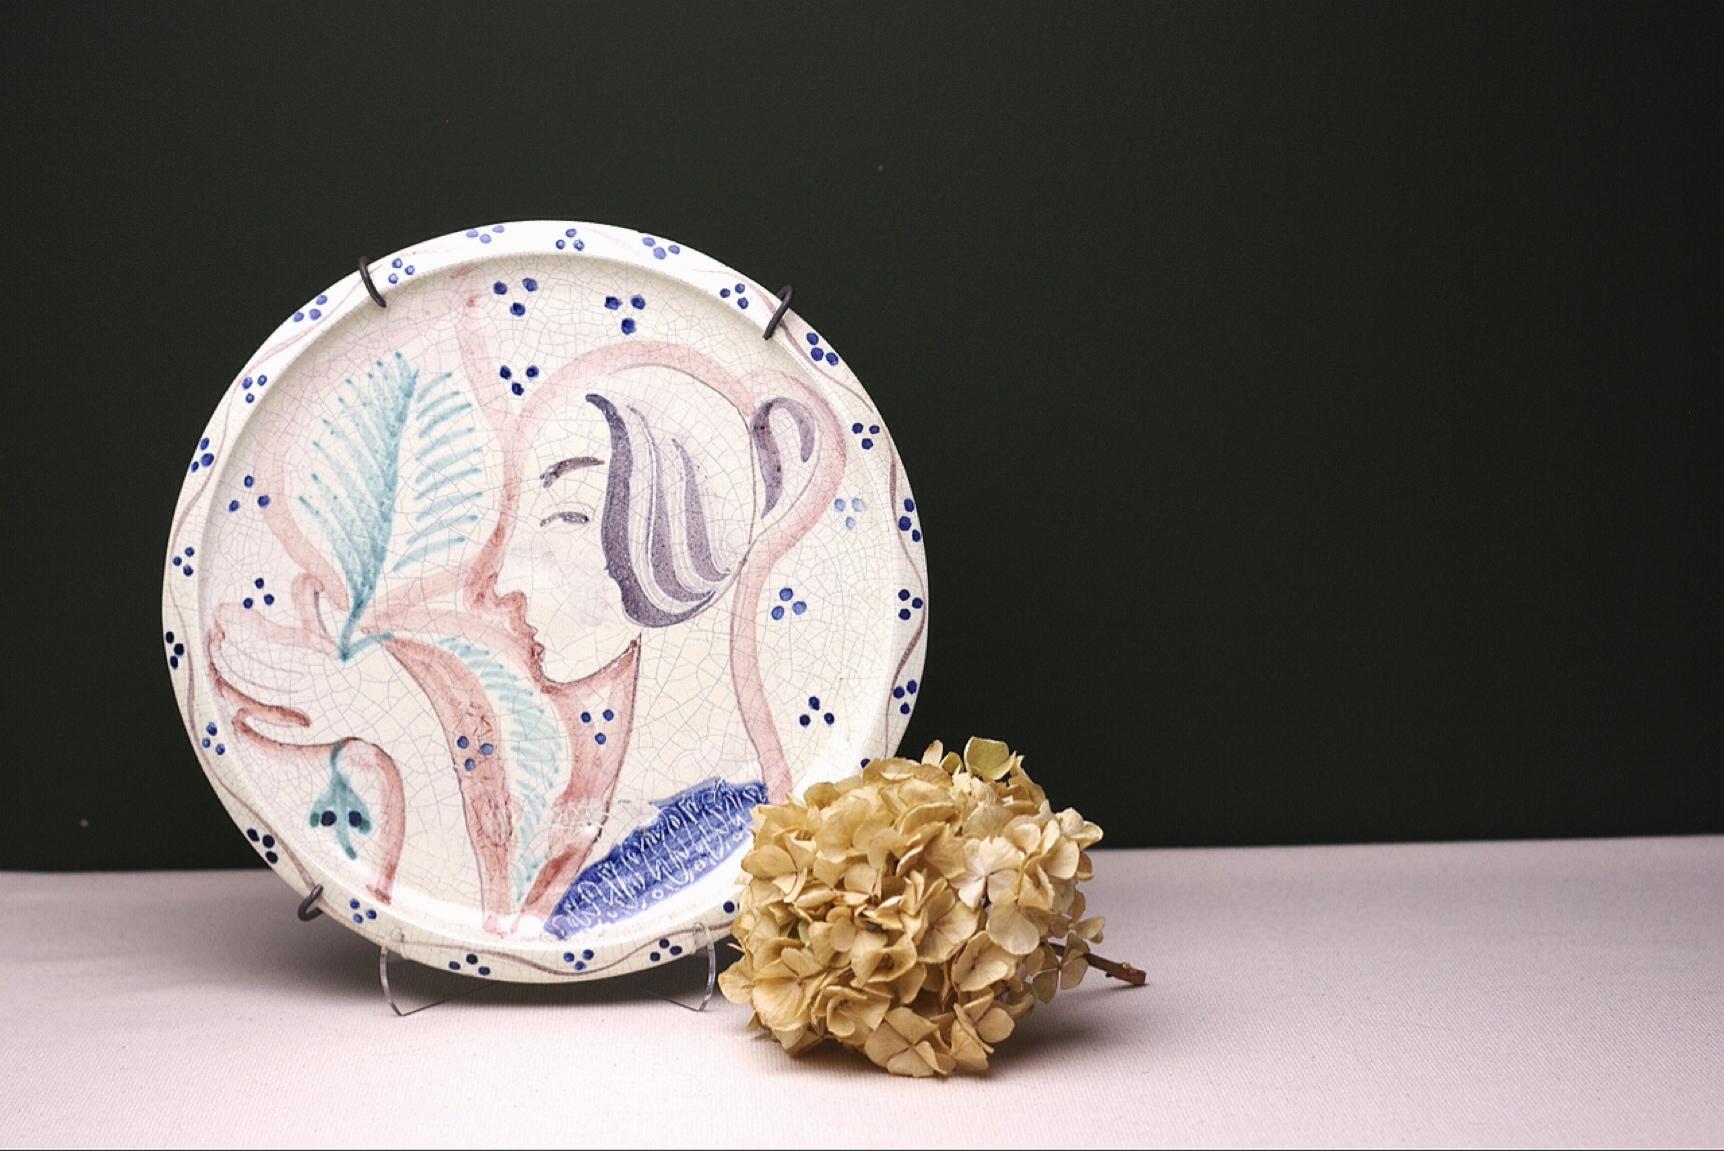 Product Description:
The Birger Kaipianen wall plate on offer is a unique and rare piece made in his early period. Birger Kaipiainen was designer who worked on the design 